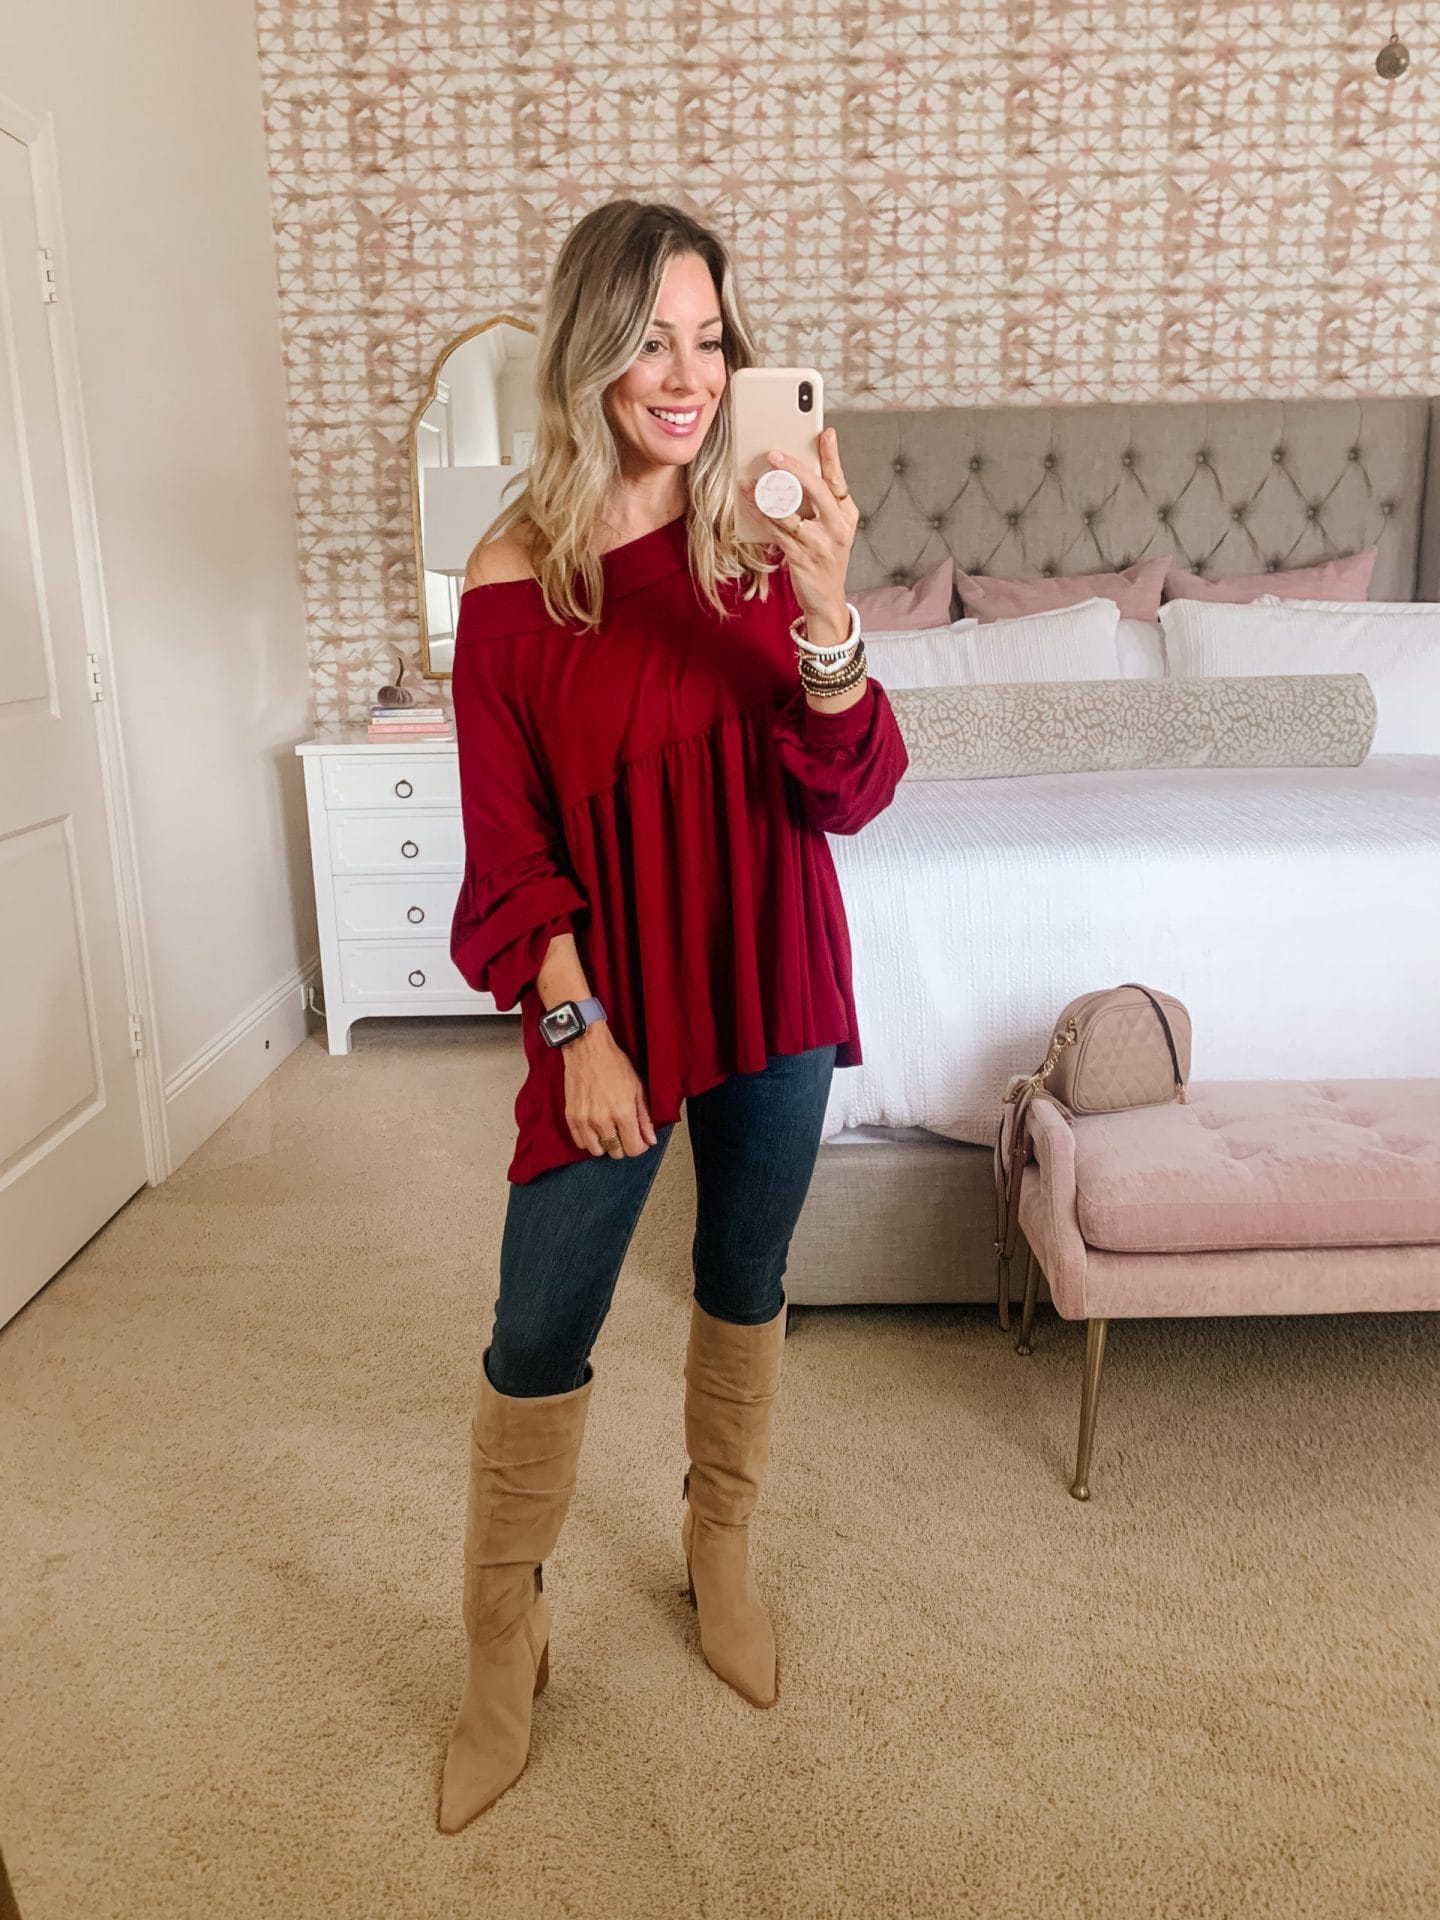 Amazon Fashion, Off Shoulder Red Top, Jeans, Boots 